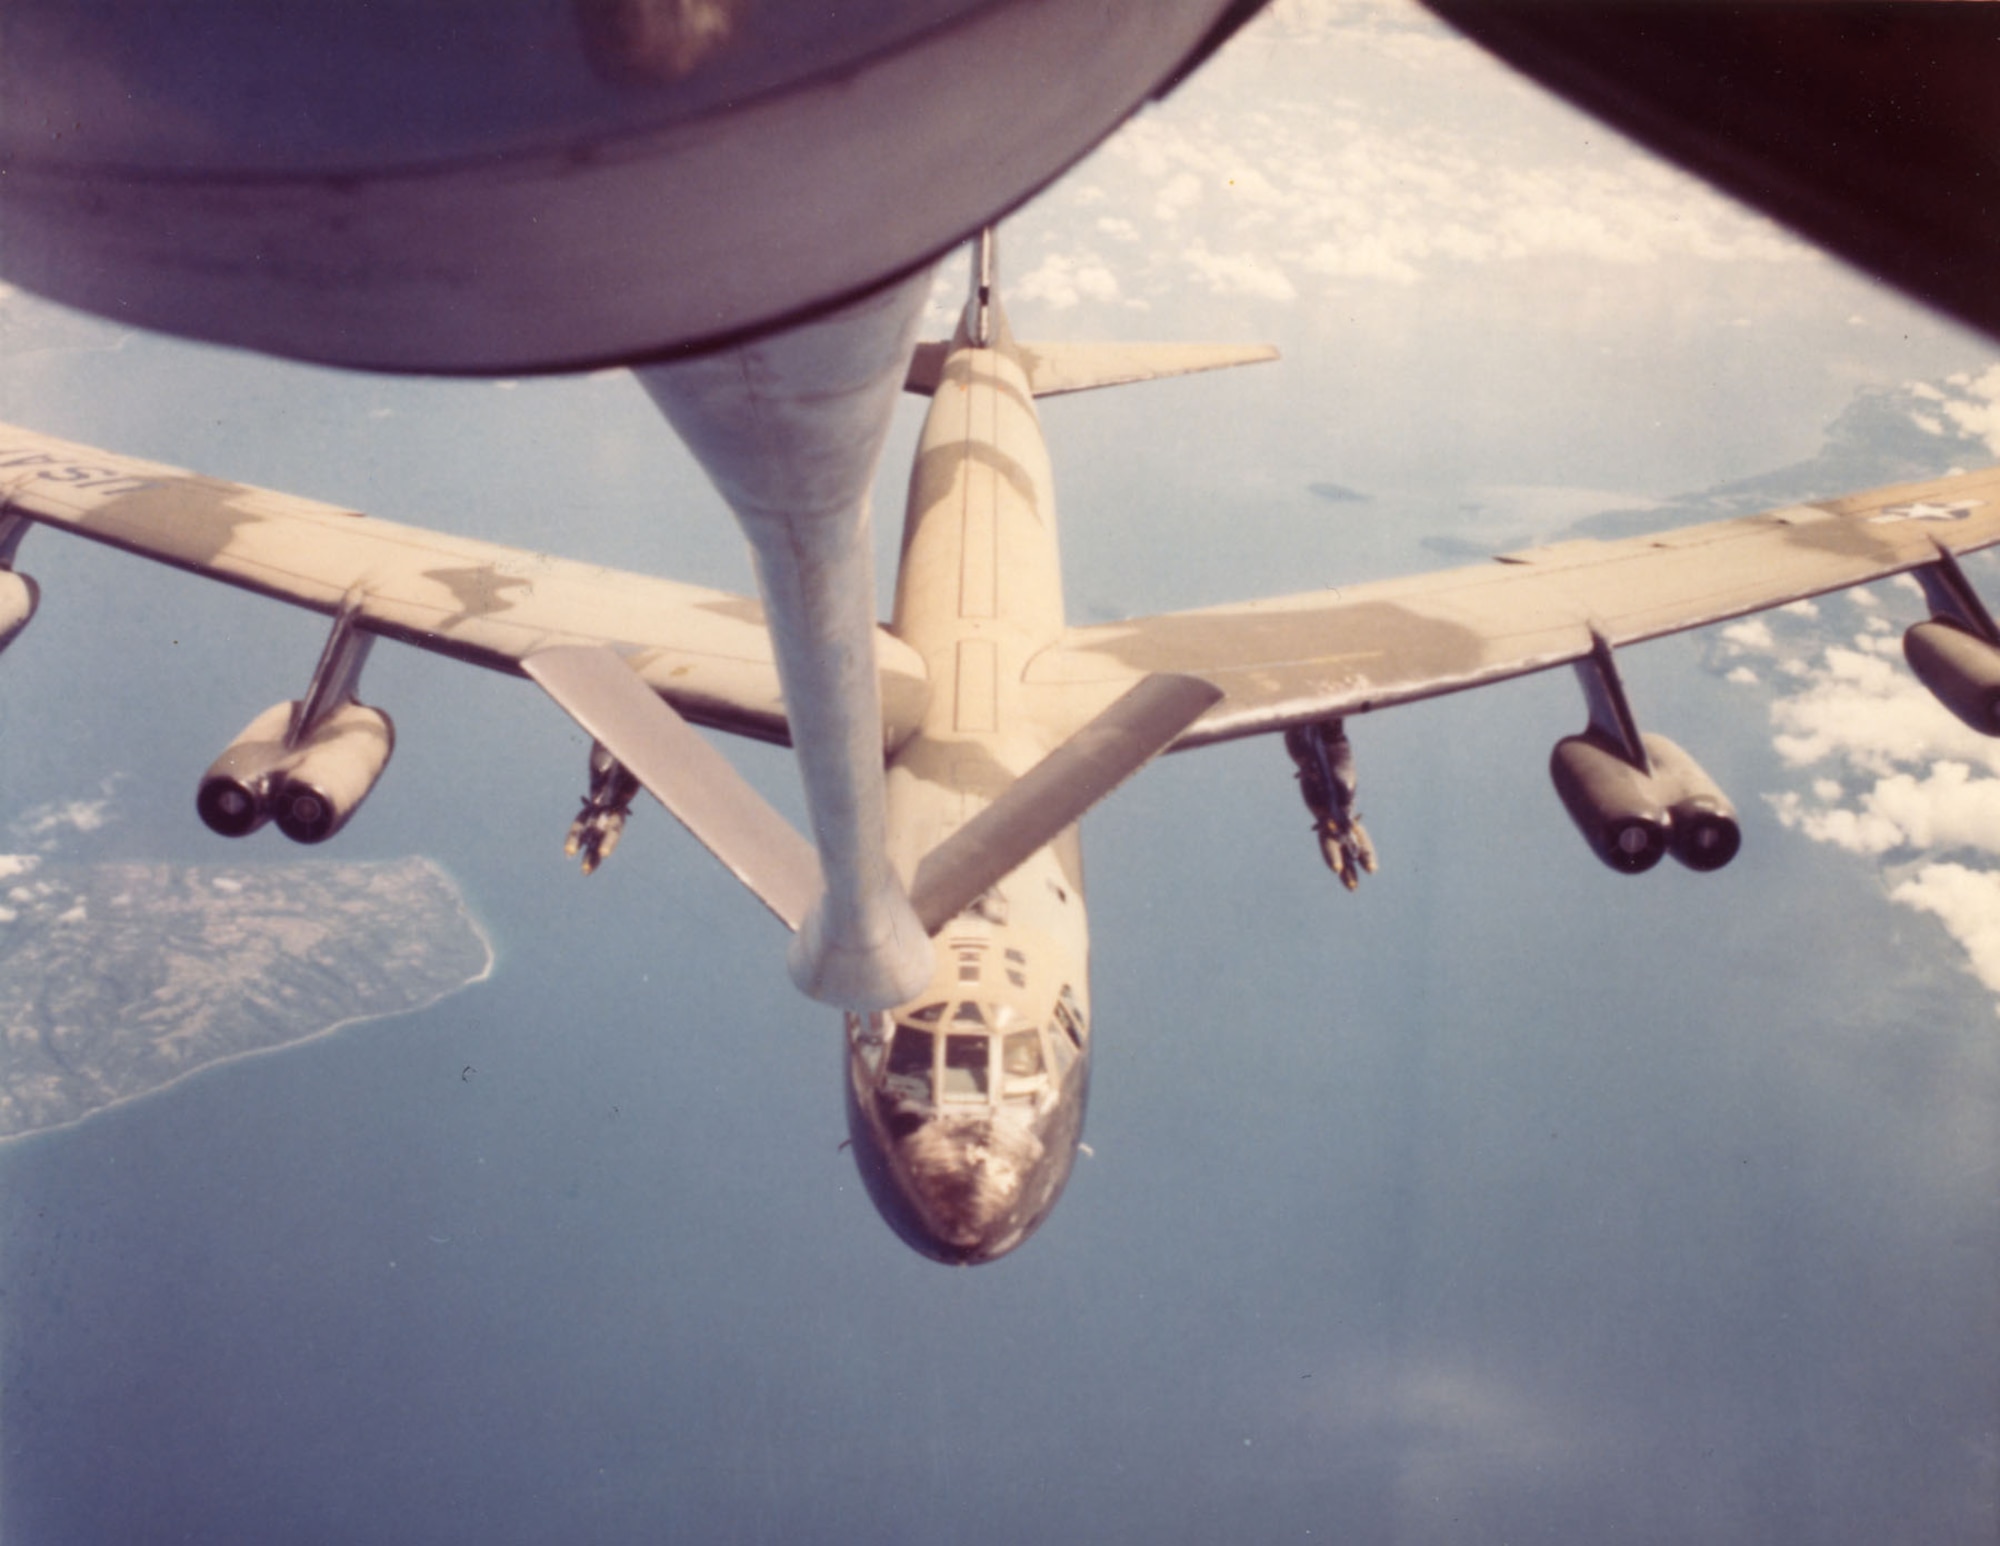 A B-52 refuels over Southeast Asia in 1967. Refueling bombers over vast expanses of ocean required precise navigation and planning. (U.S. Air Force photo)